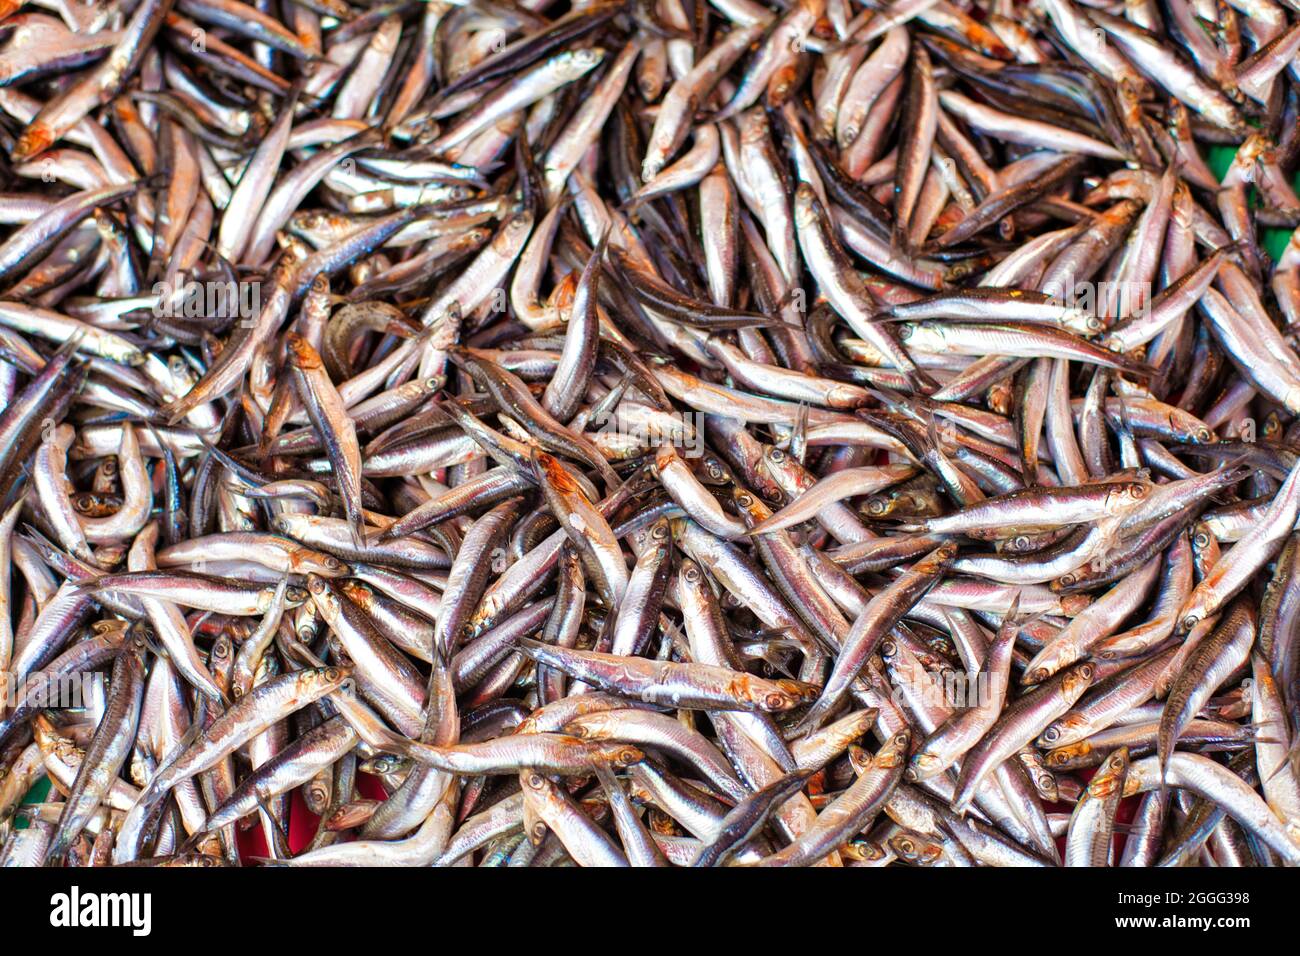 Top view shot of a pile of anchovies many fish lying on top of each other on the floor. Stock Photo